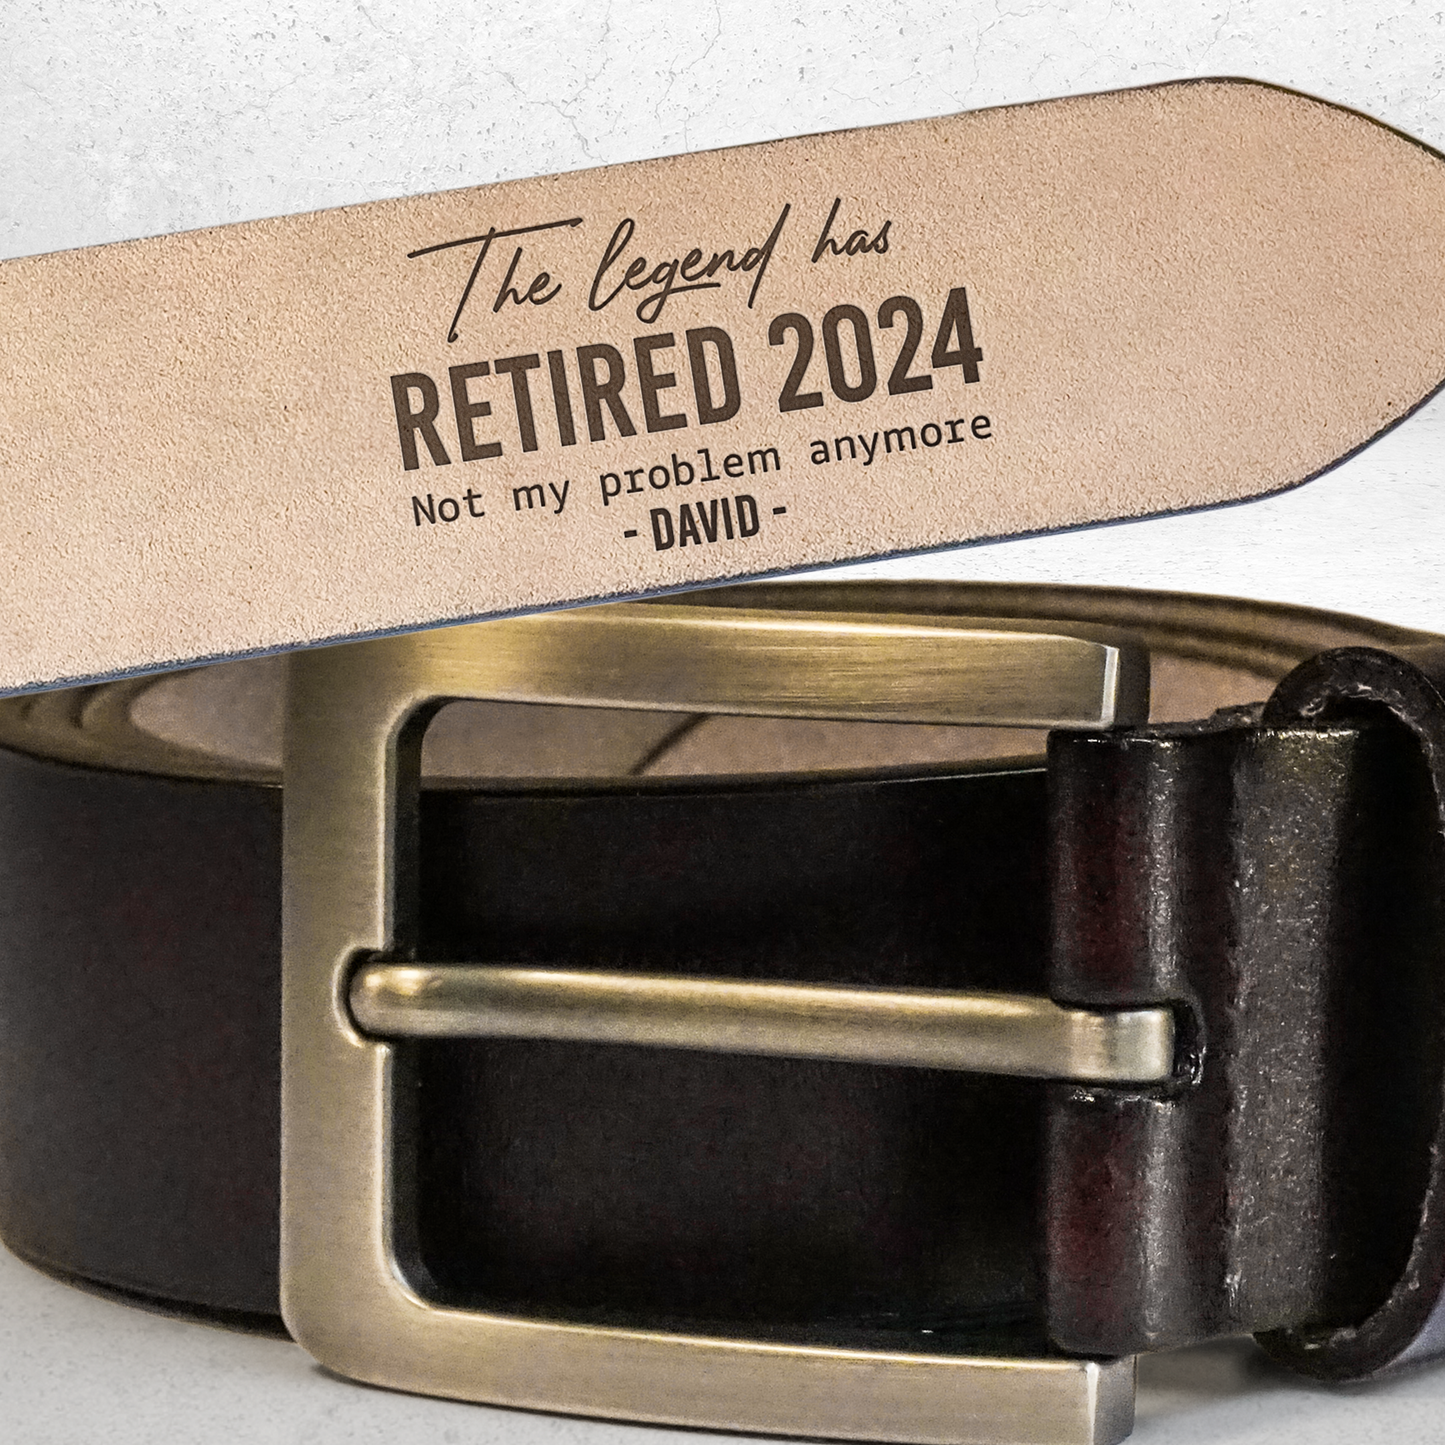 The Legend Has Retired Not My Problem Anymore - Personalized Engraved Leather Belt